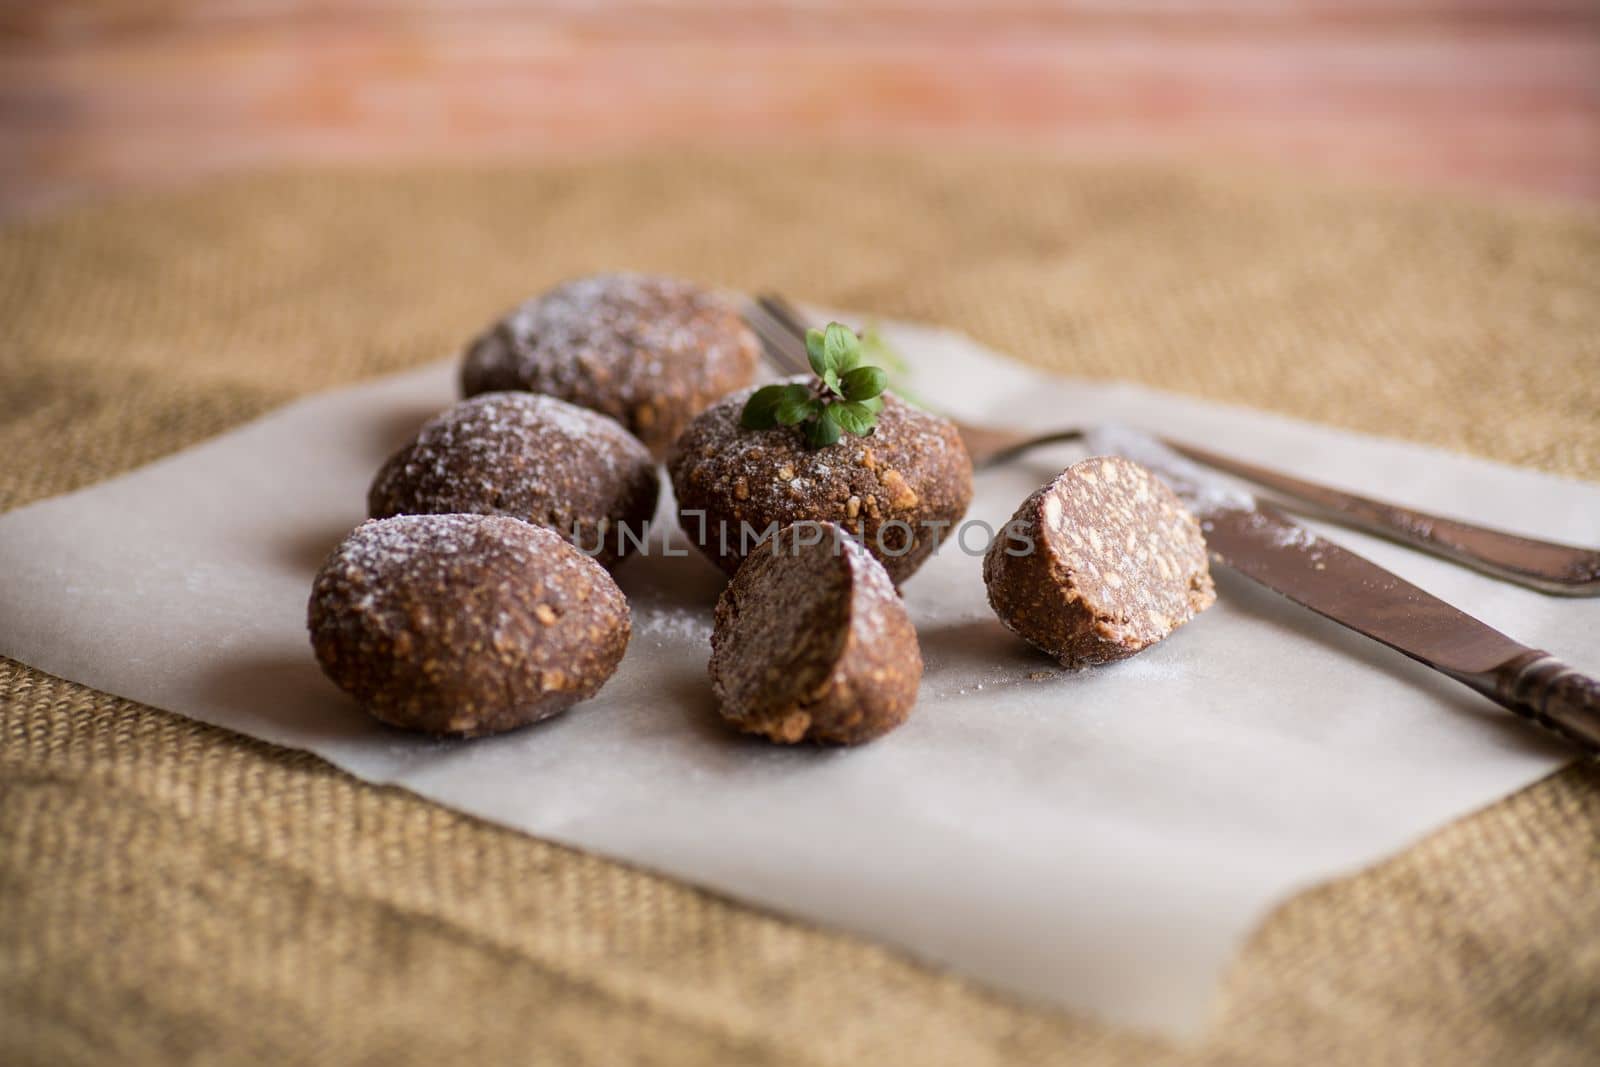 chocolate sweet cakes made from pureed cookies with additives, on baking paper.